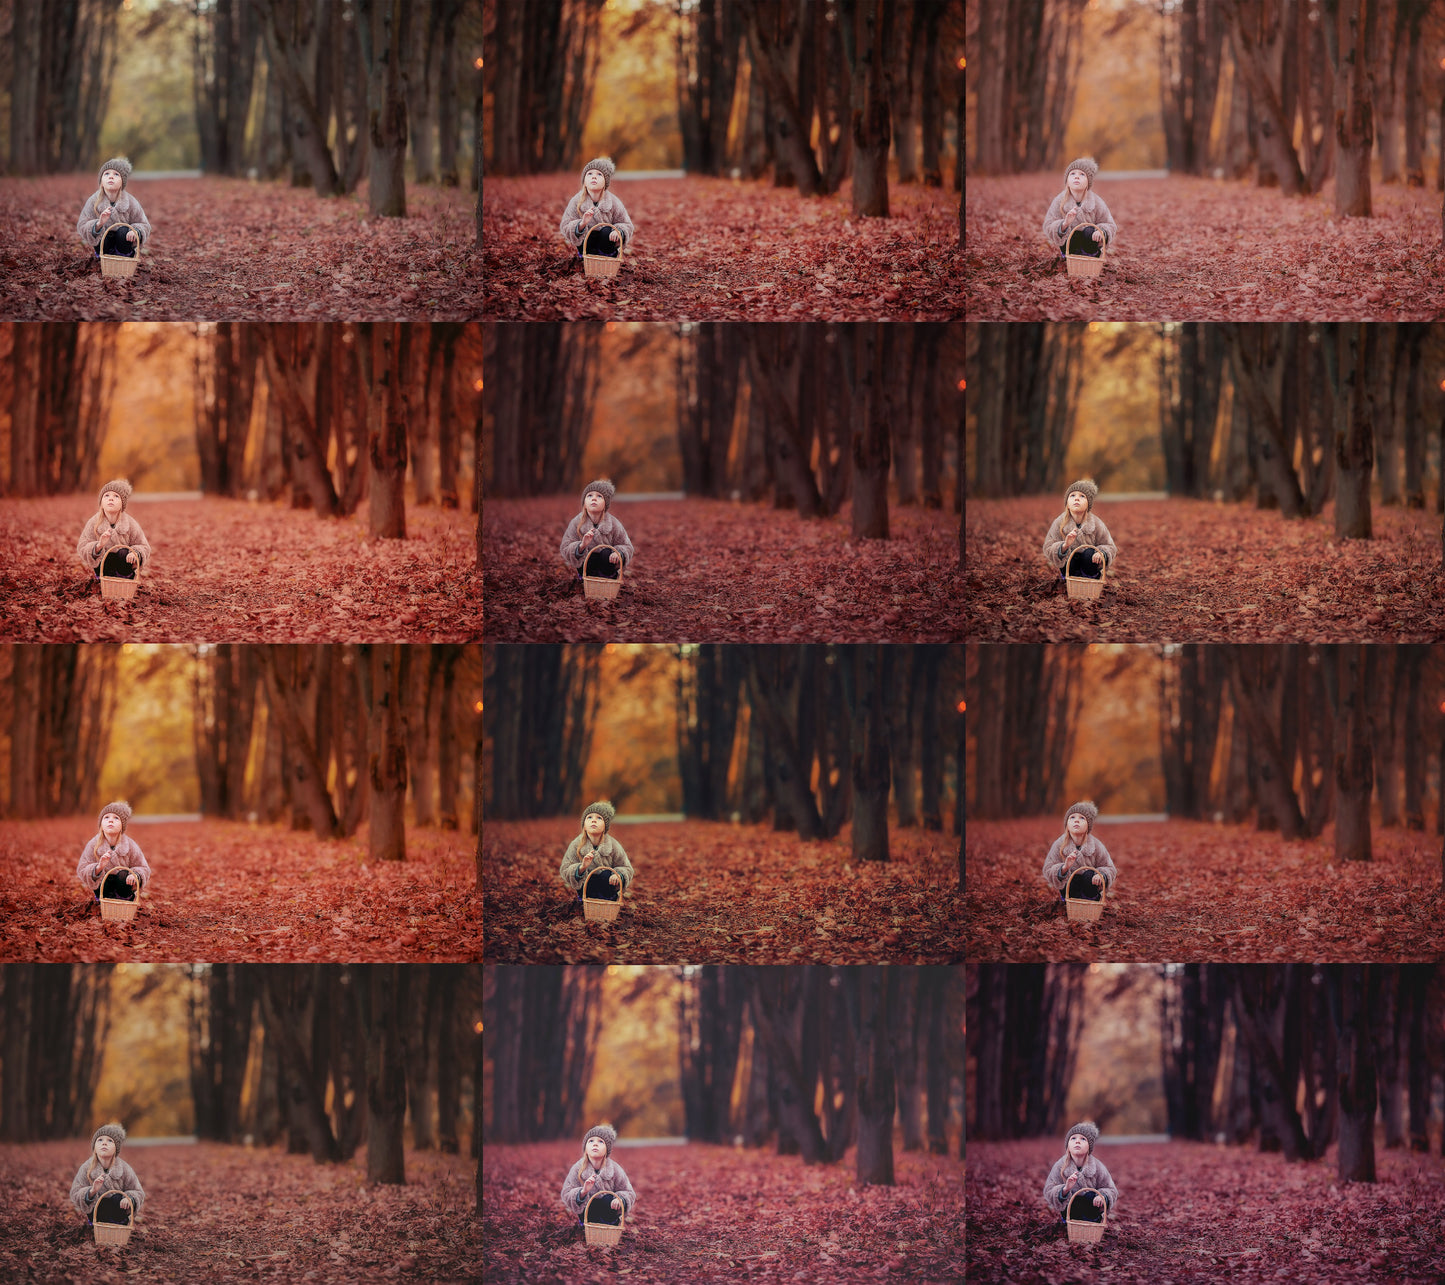 Painted Autumn PS Actions + Free Gift - Photoshop Overlays, Digital Backgrounds and Lightroom Presets